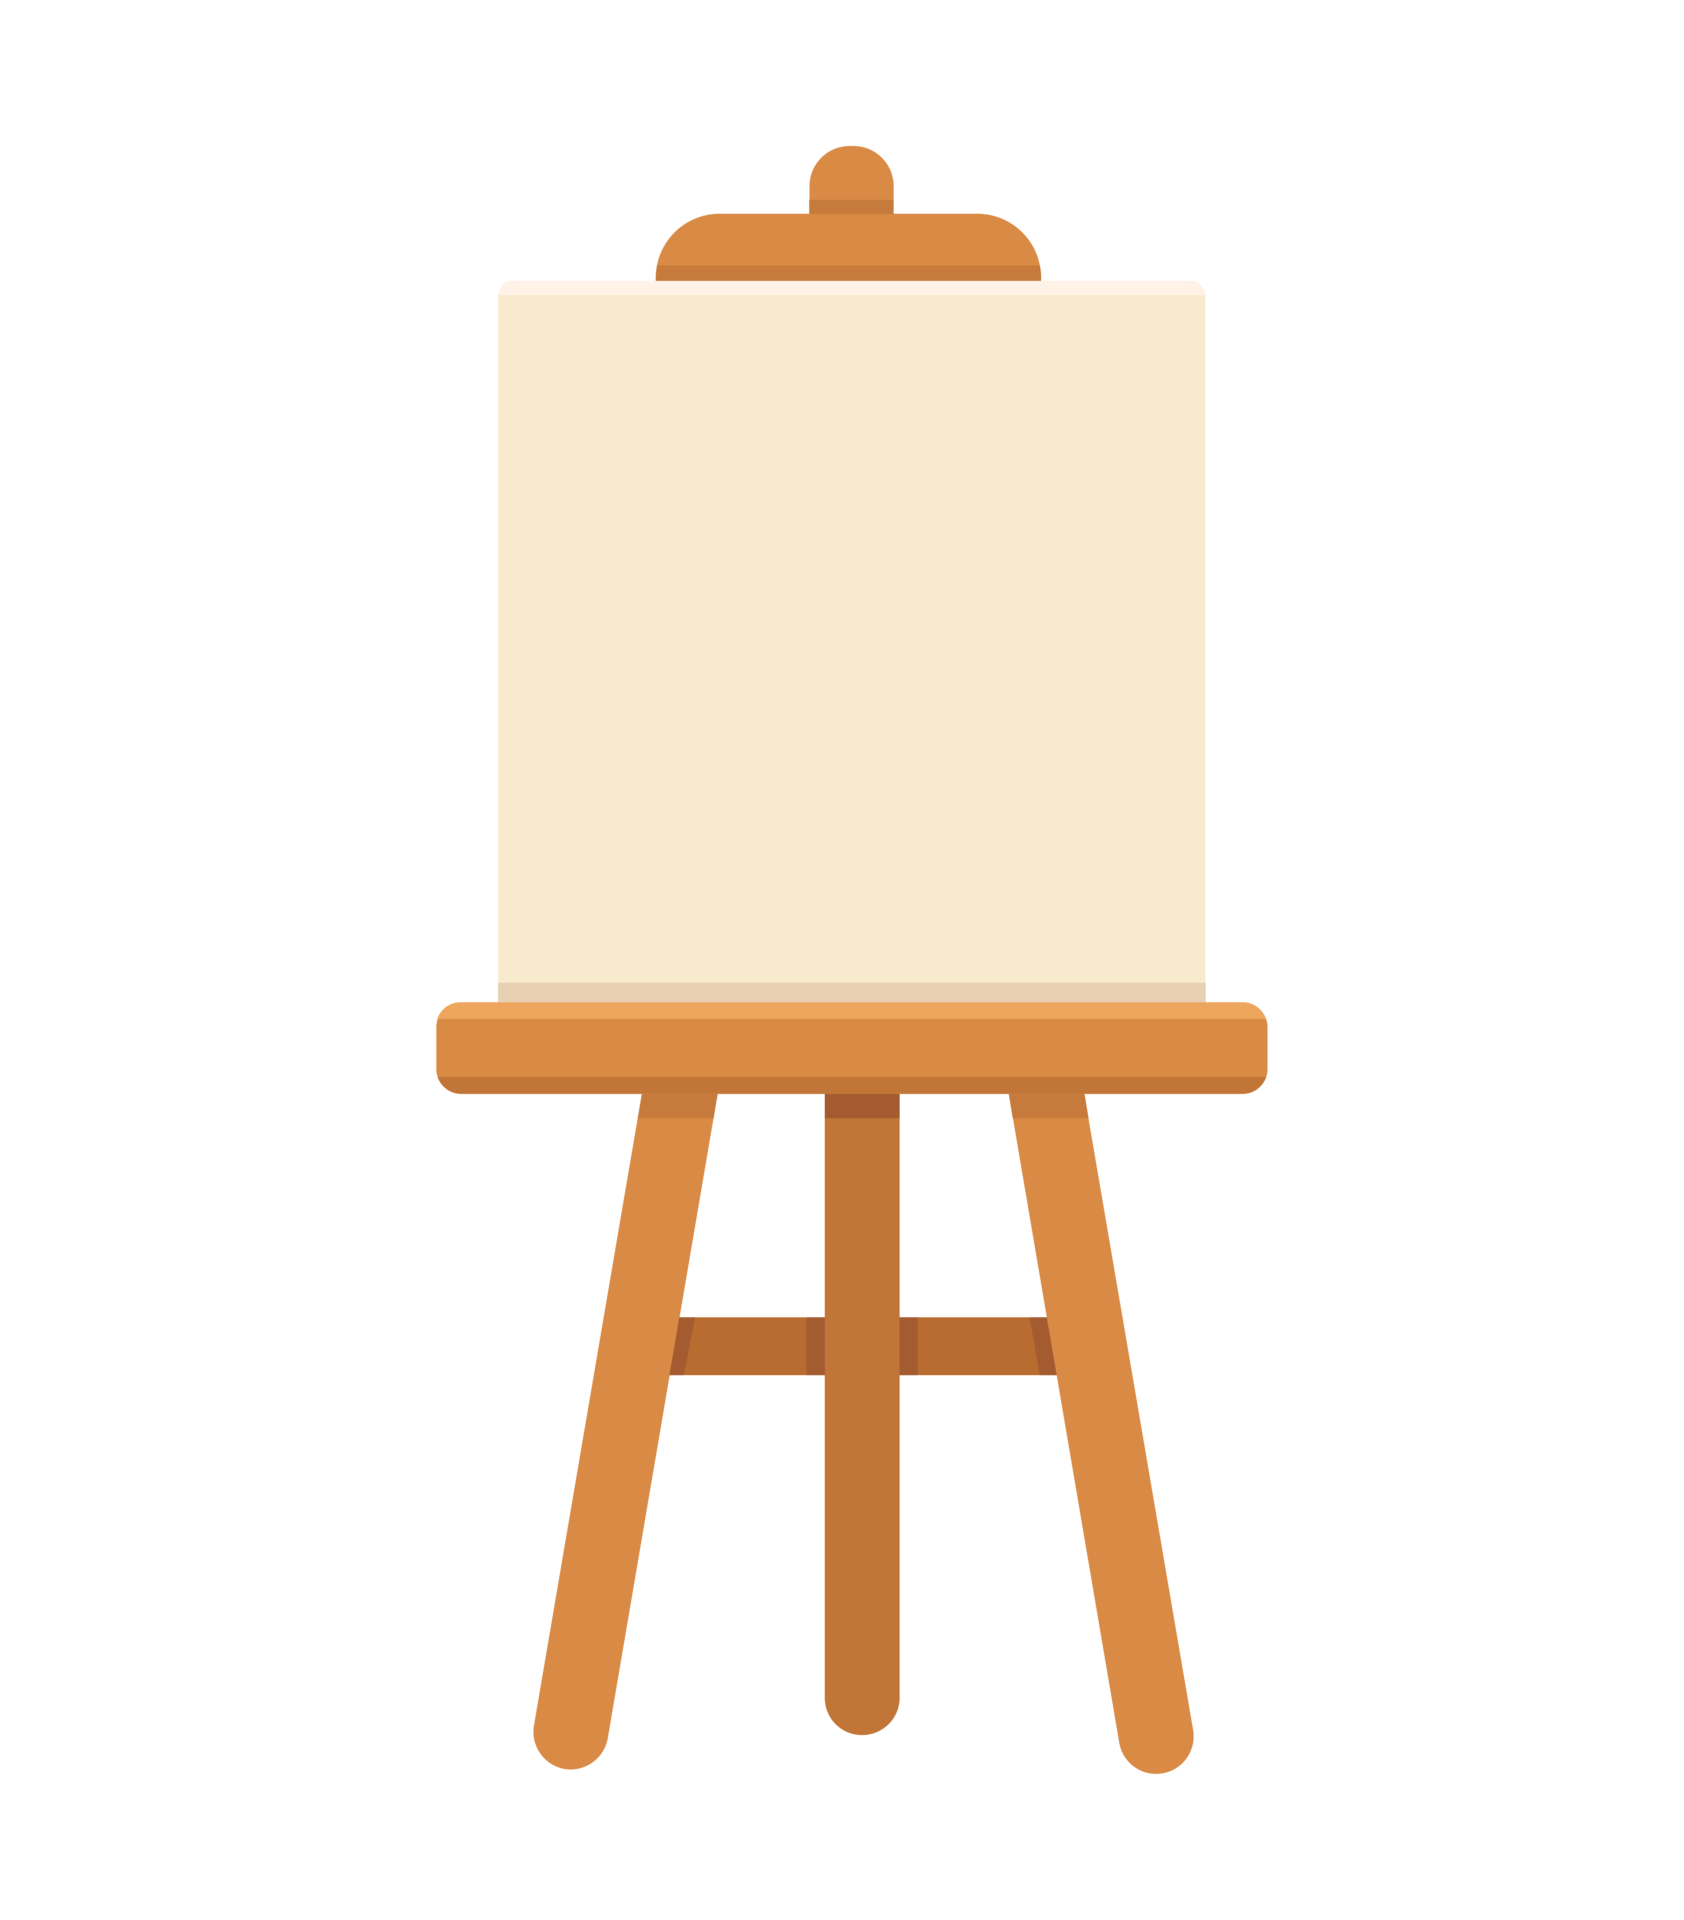 https://static.vecteezy.com/system/resources/previews/012/224/945/original/wooden-easel-with-blank-canvas-png.png